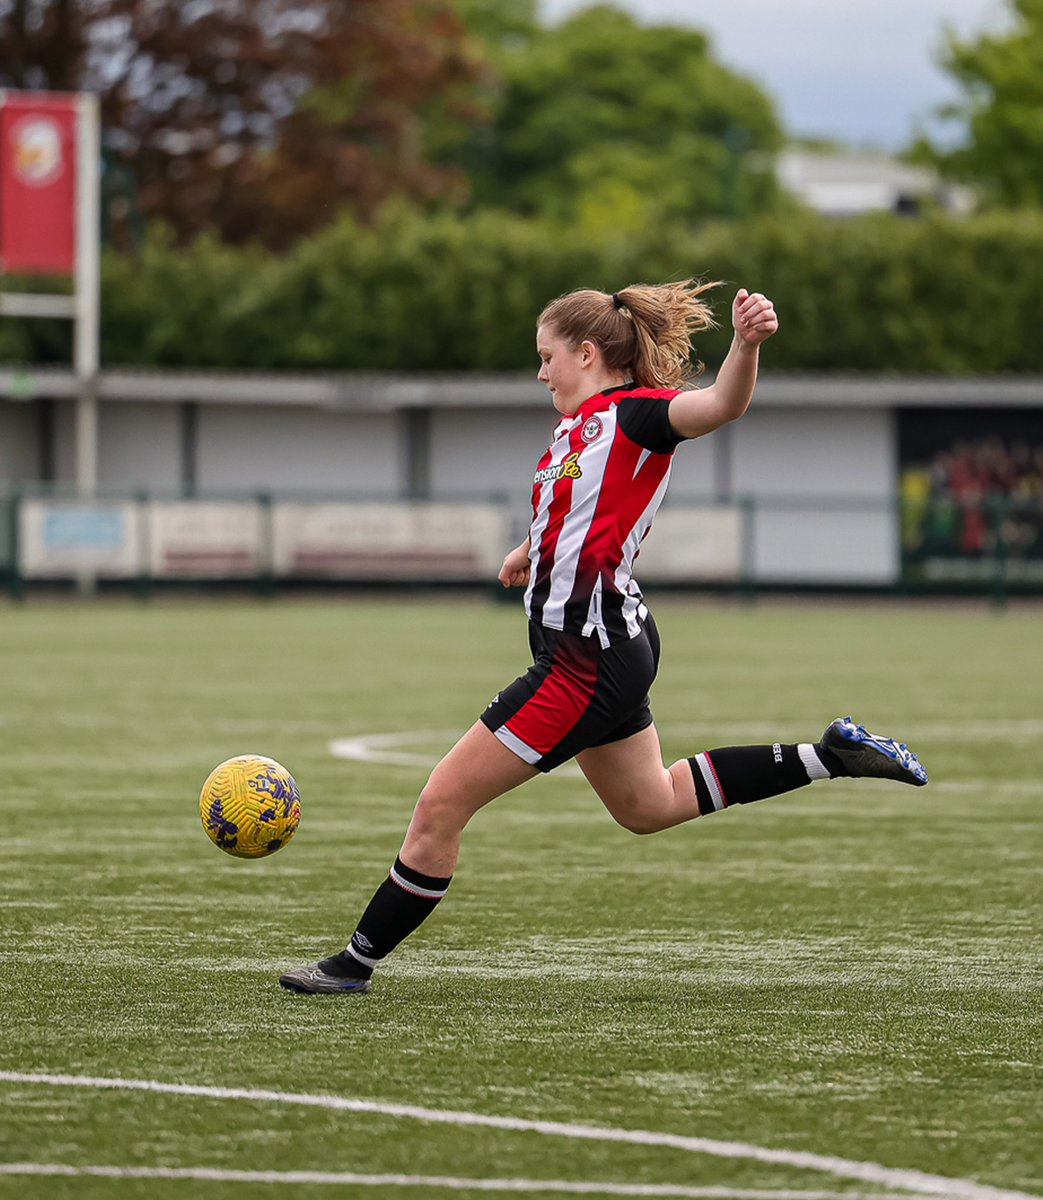 51 goals and counting for Chloe Logie this season 😳 #BrentfordFCW | #BrentfordFC